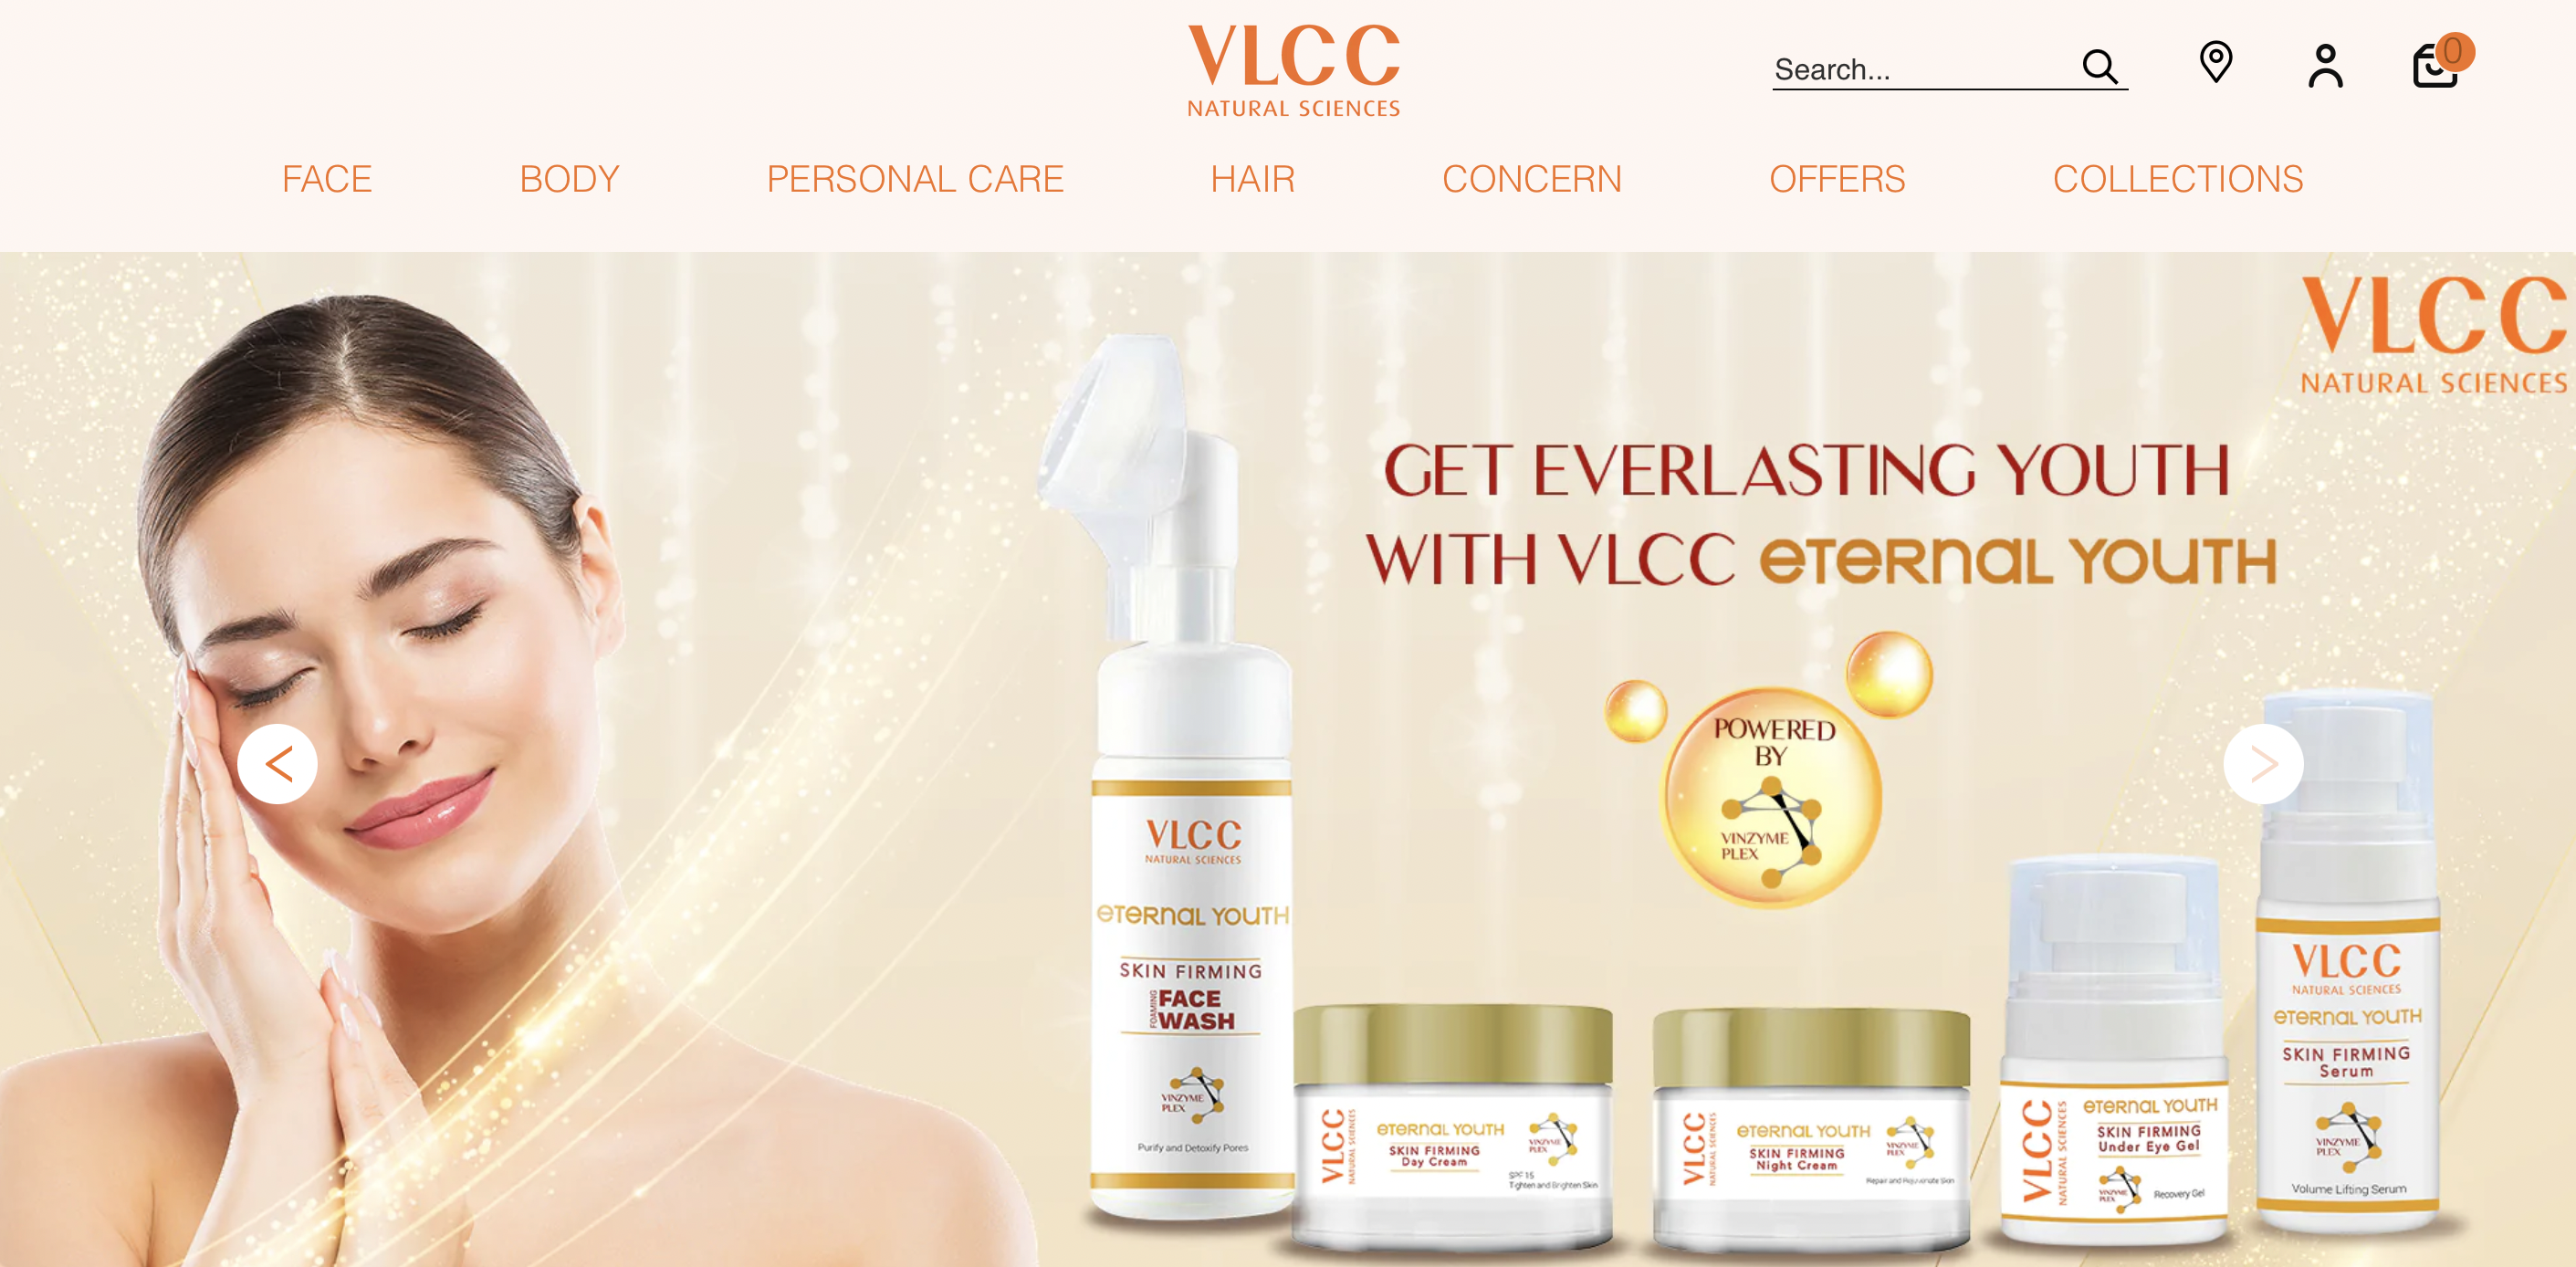 Carlyle Acquires a Majority Stake in VLCC, Indian Skincare and Beauty Platform